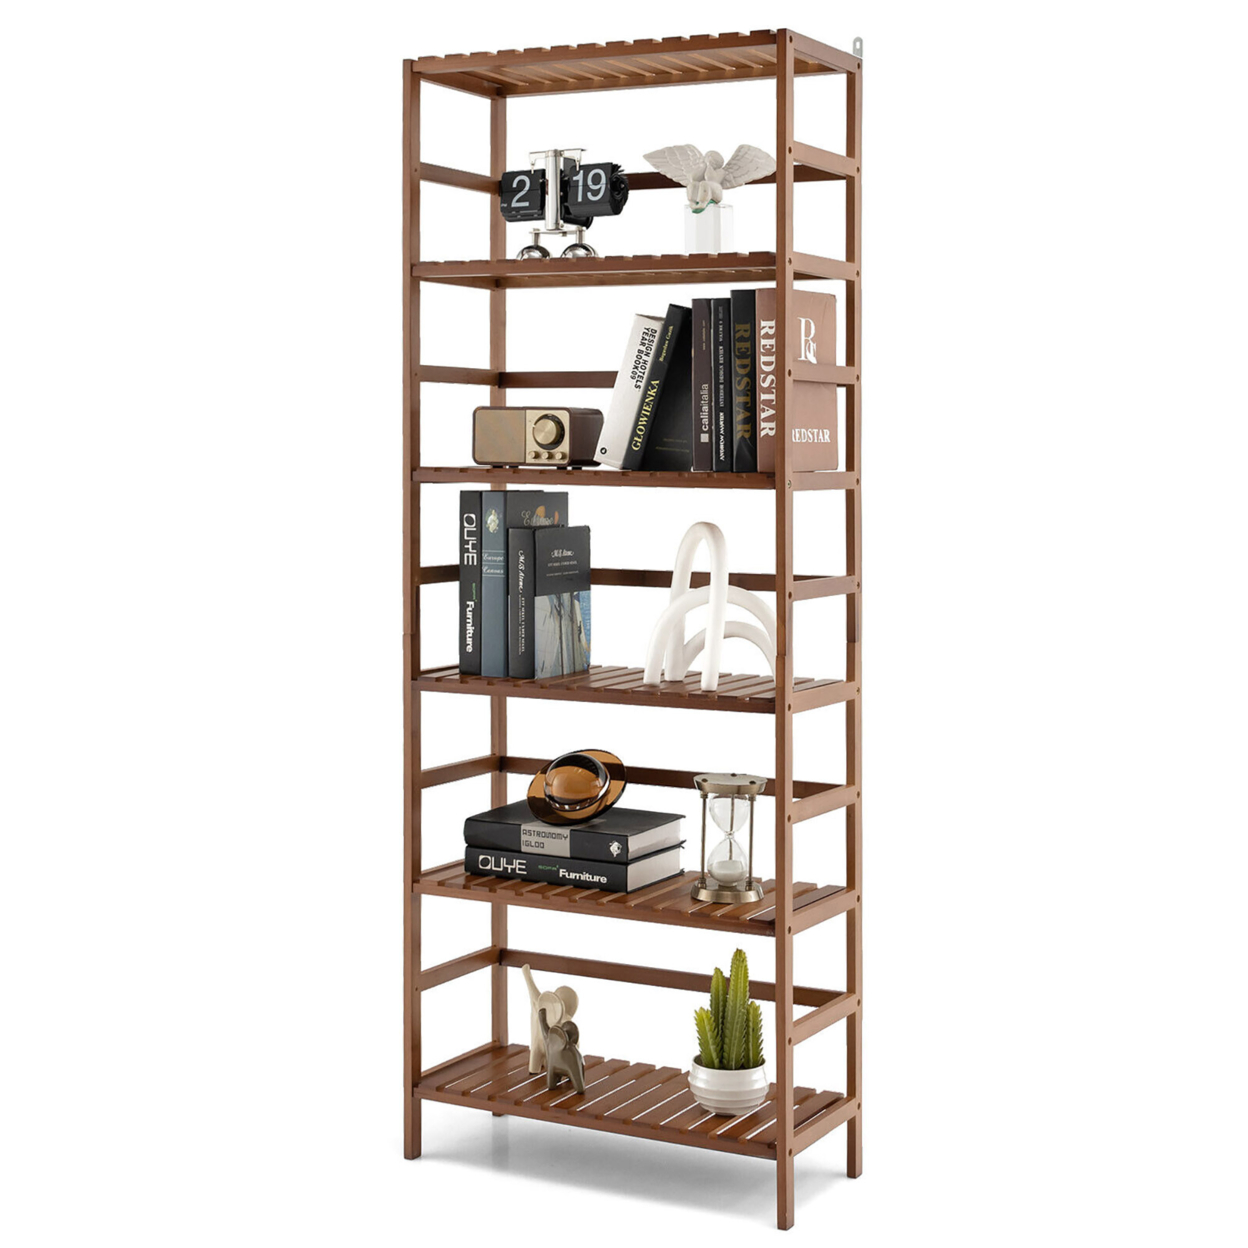 6 Tier Bamboo Bookcase 63'' Tall Storage Organizer W/ Adjustable Shelves Brown